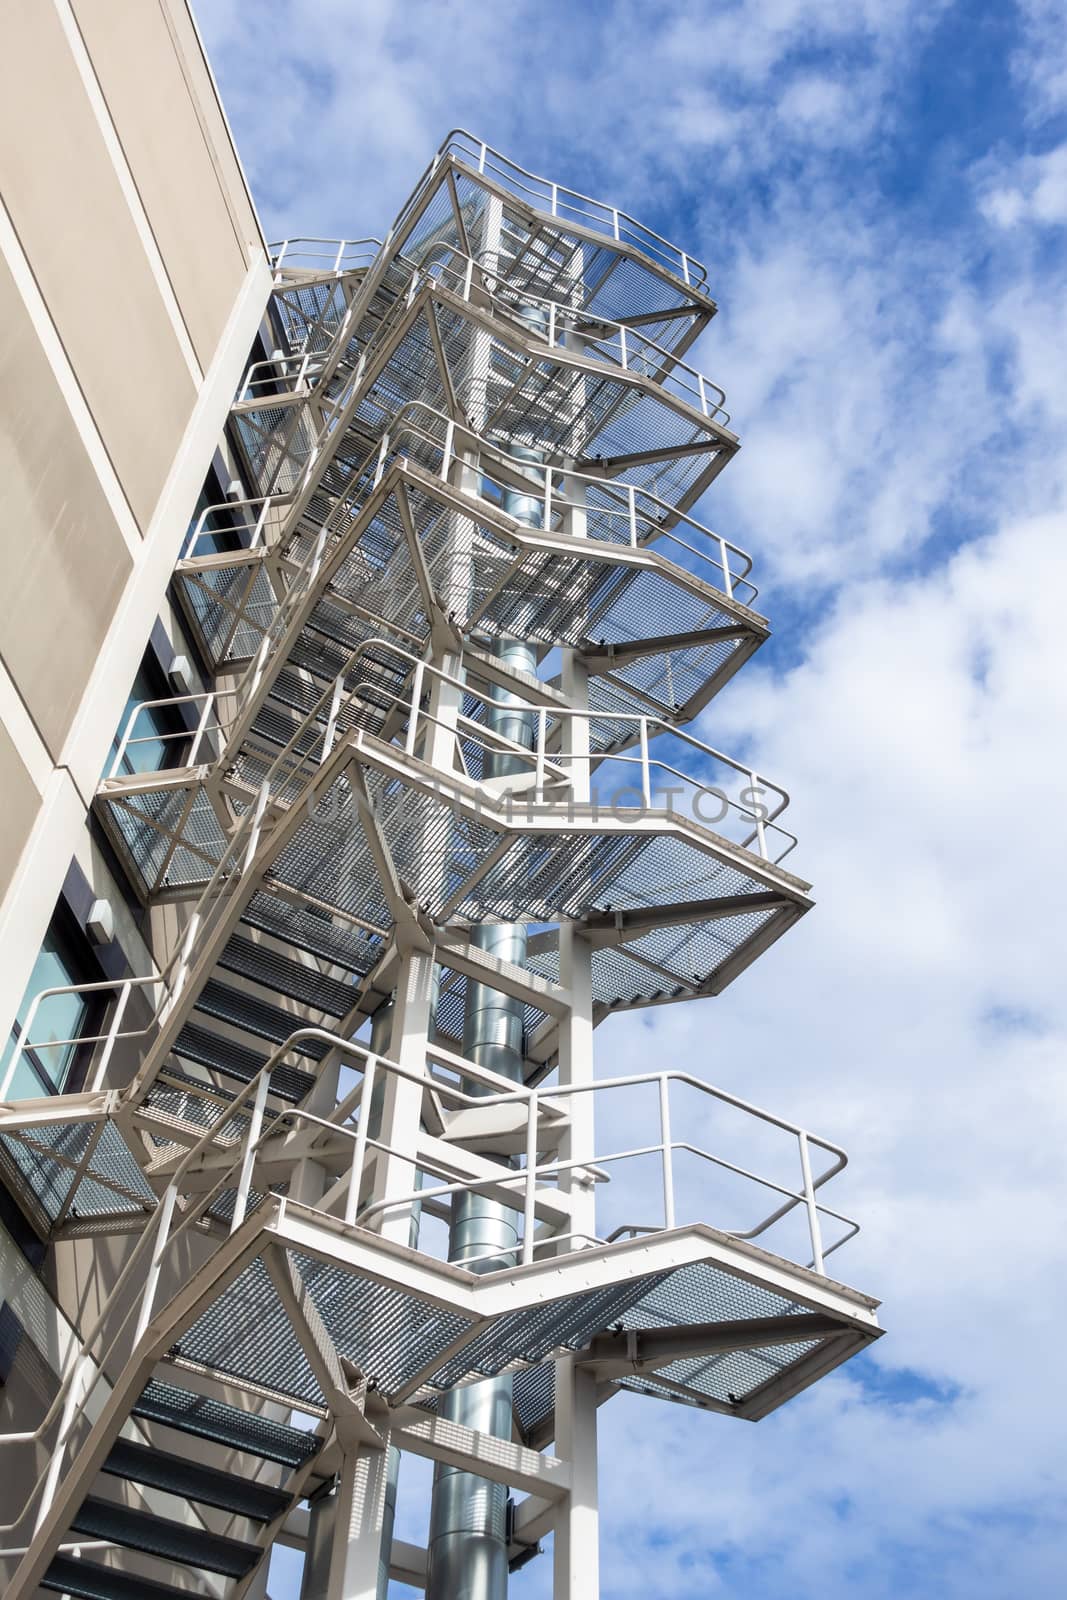 An image of some stairs at a high building